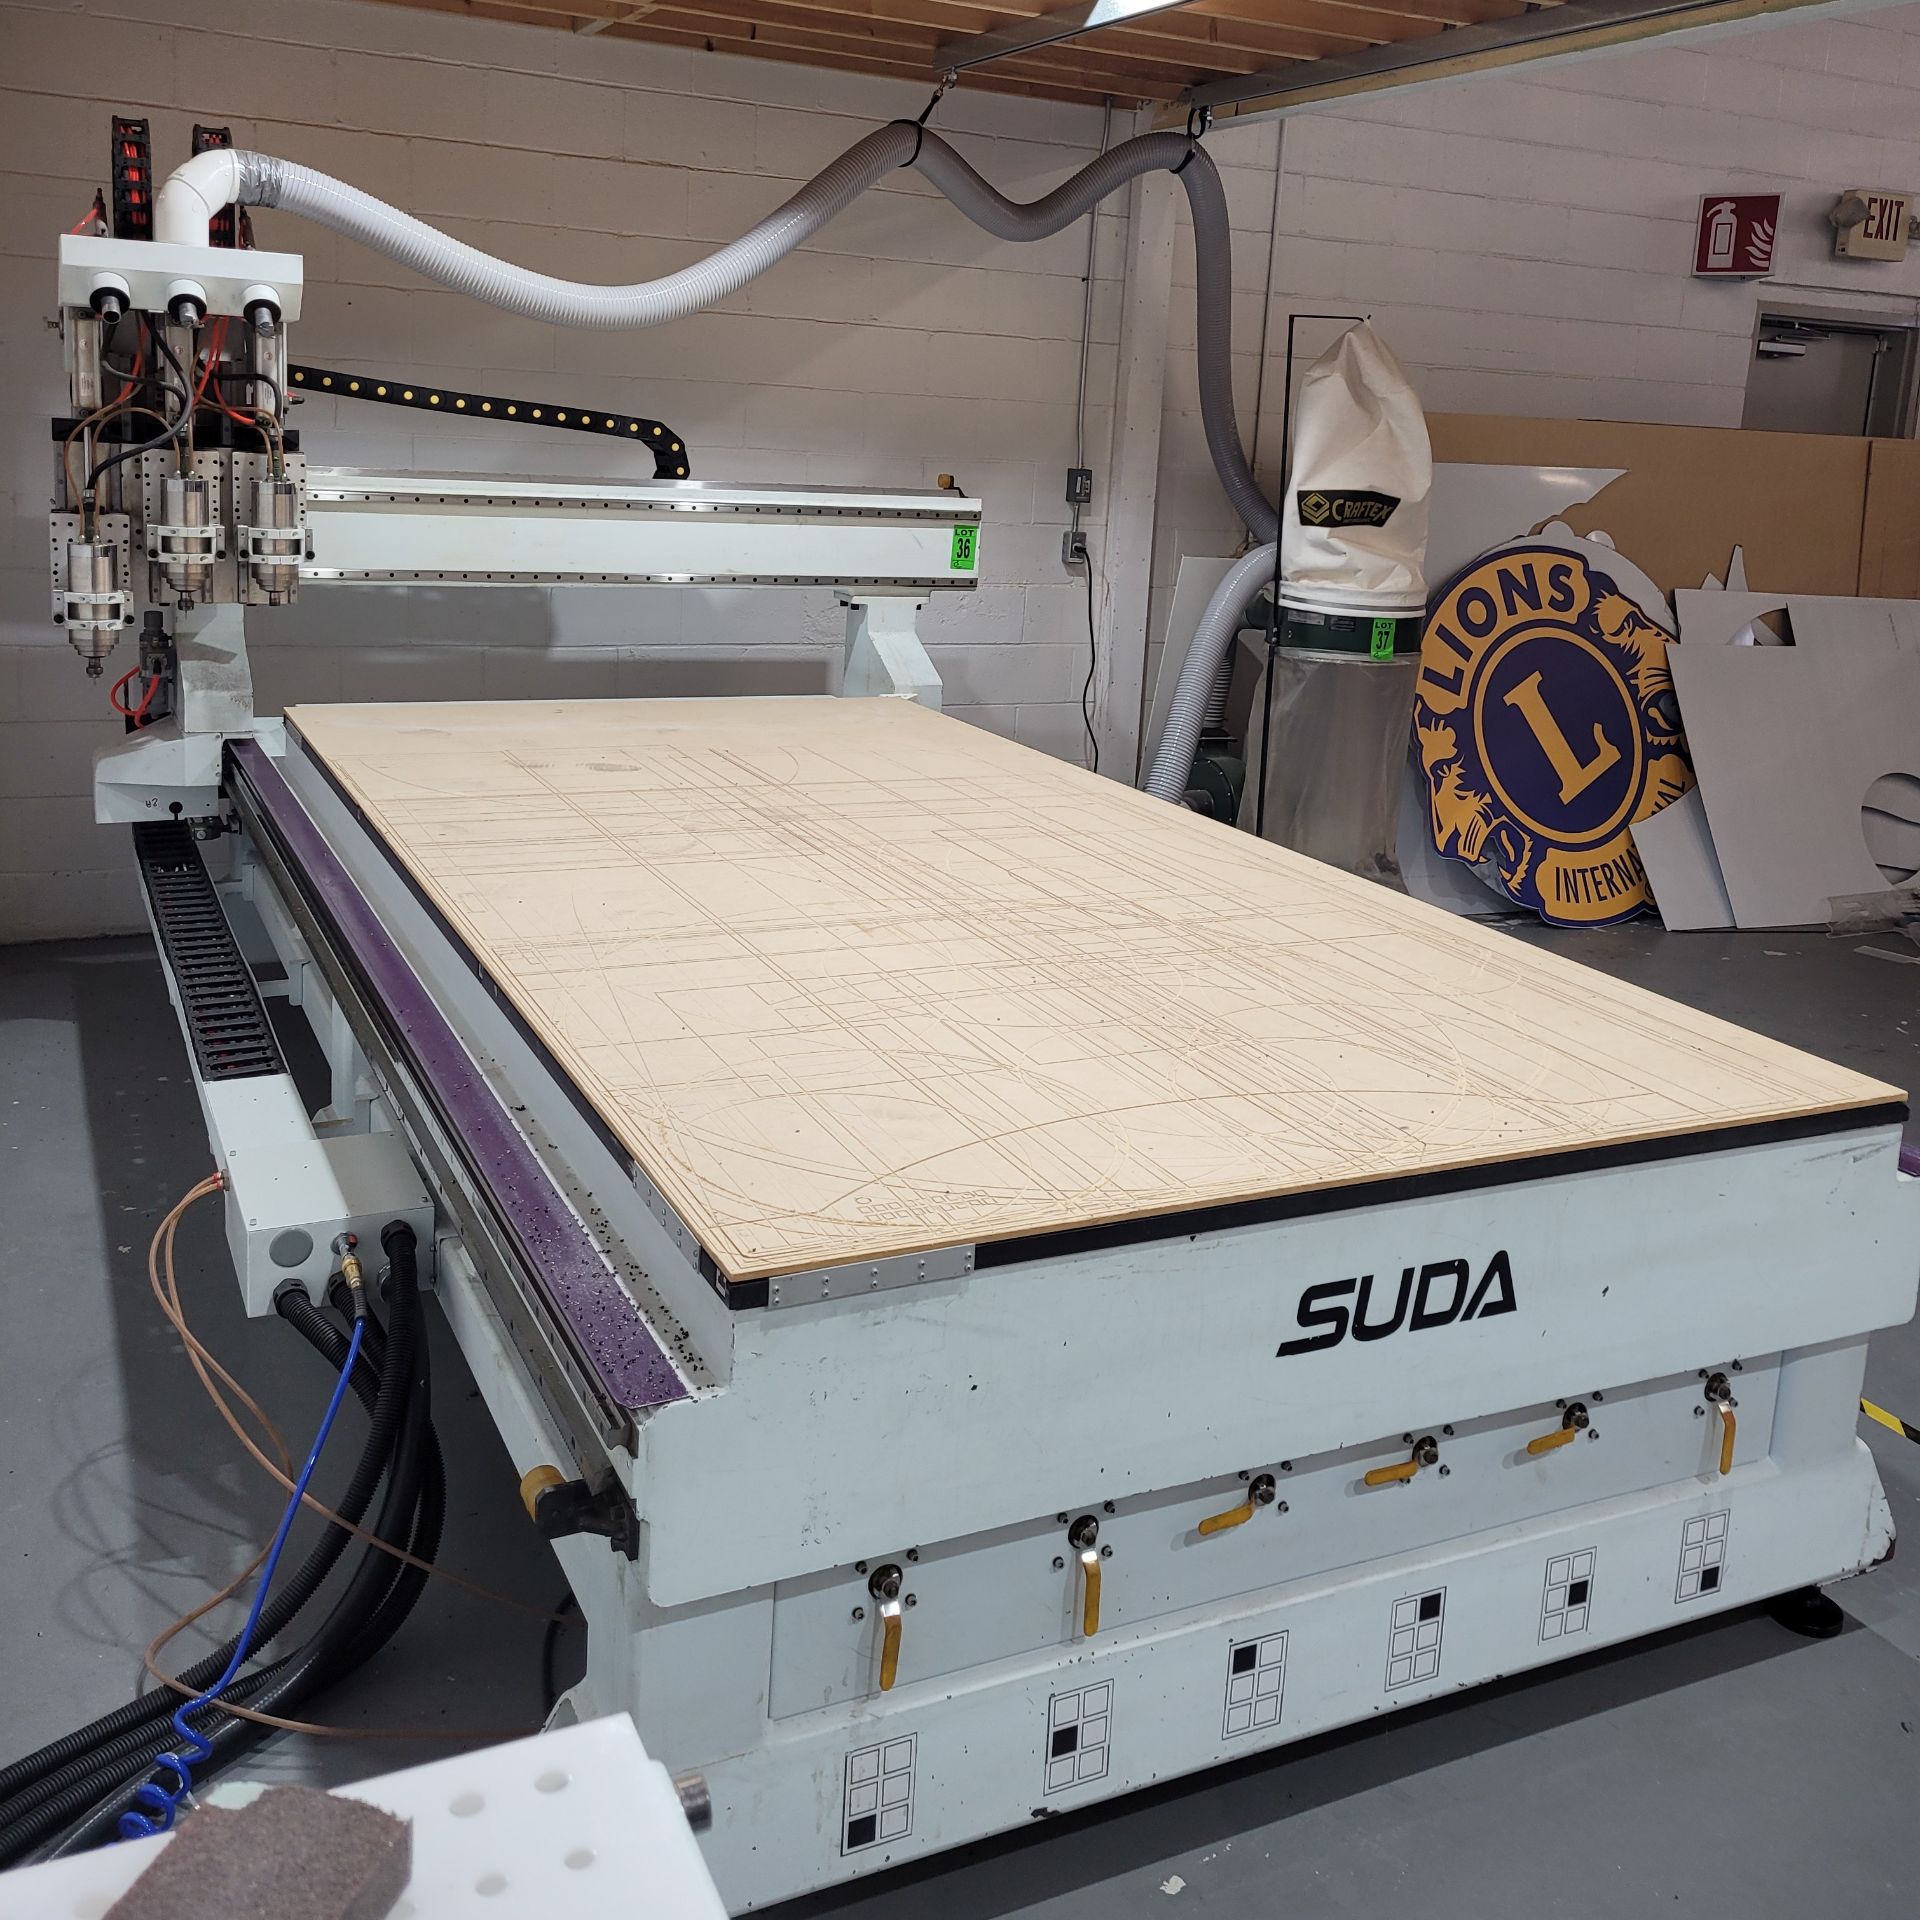 2015 SUDA ATC CNC Router mod. MG1630C, 3-Head System with Accessories and CRAFTEX mod. FM-300 Collec - Image 24 of 51